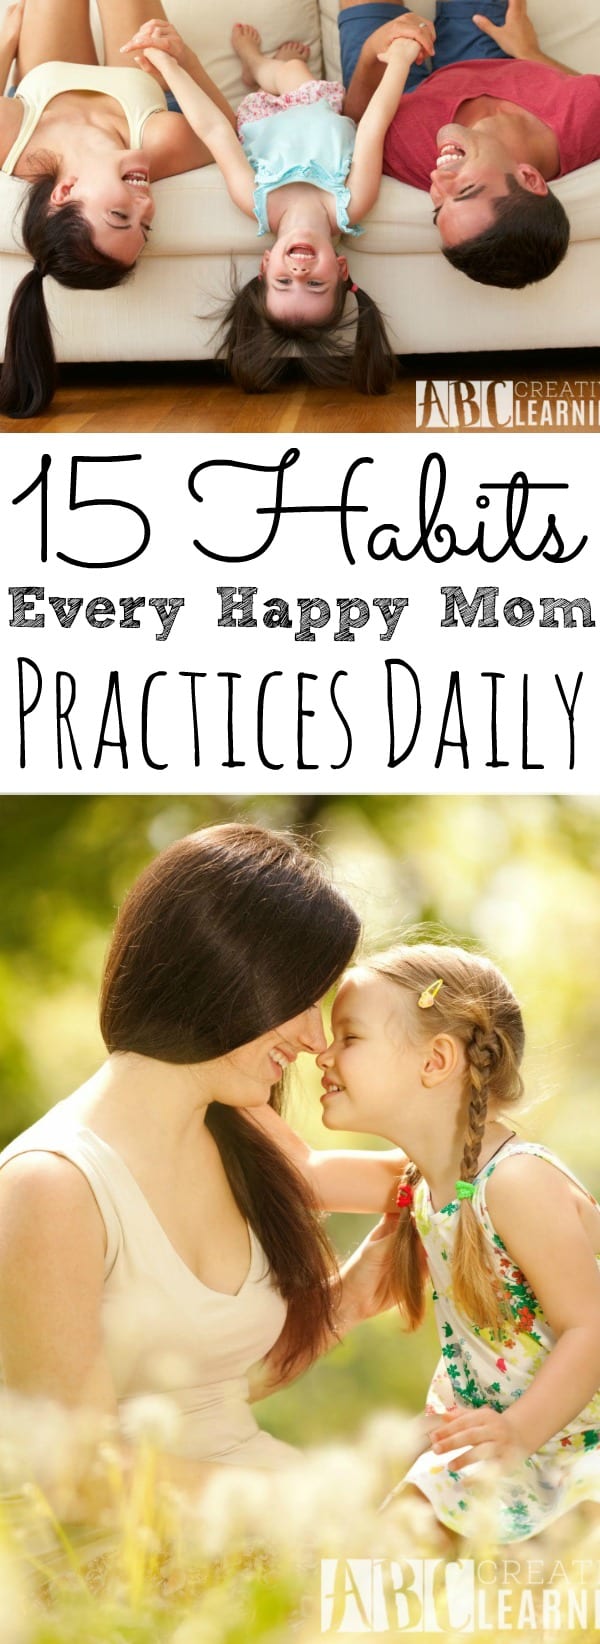 Habits Every Happy Mom Practices Daily